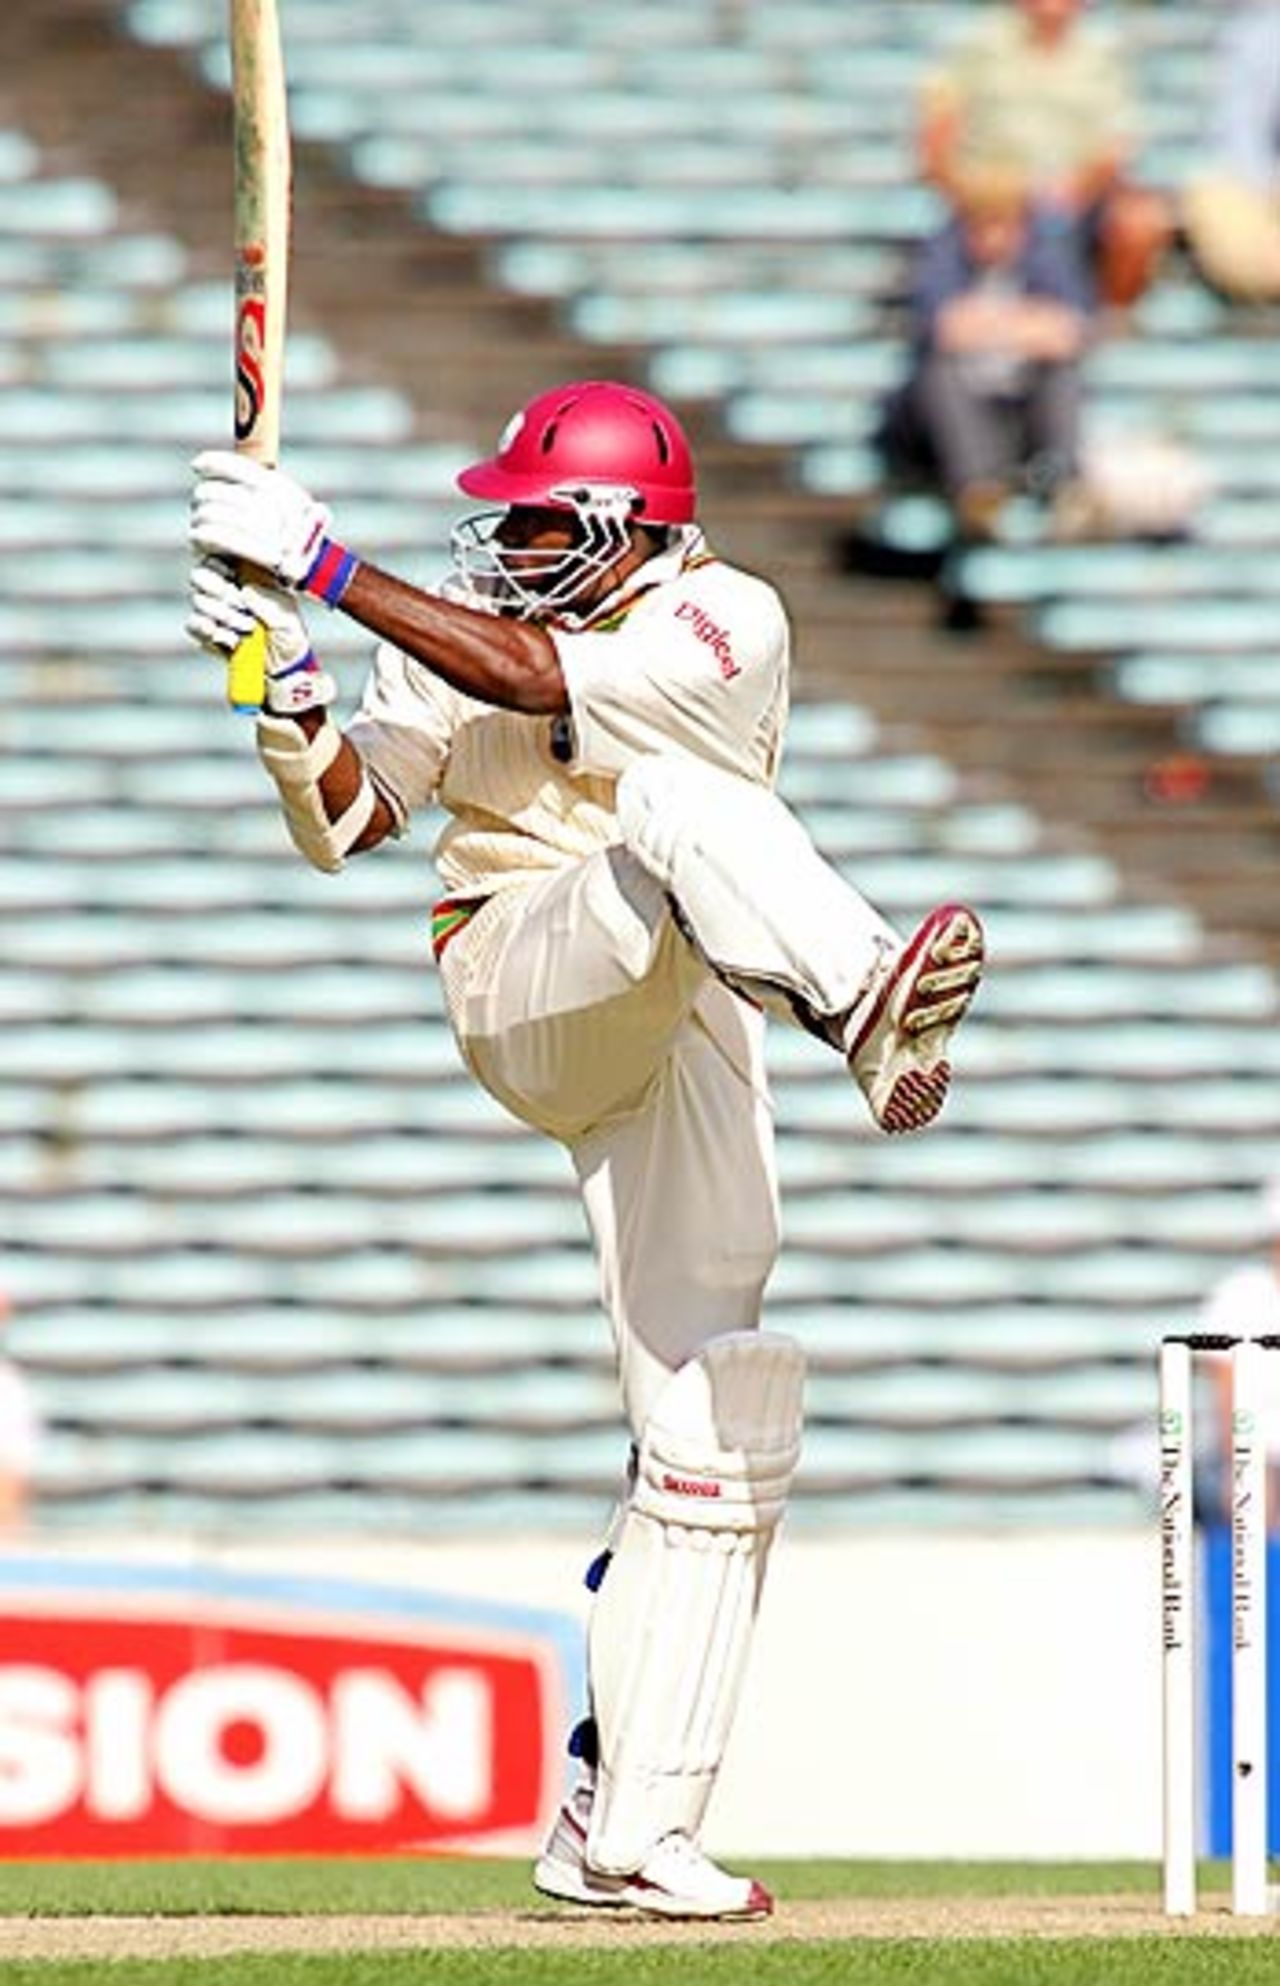 Chris Gayle stylishly puts one away to the legside, New Zealand v West Indies, 1st Test, Auckland, 3rd day, March 11 2006